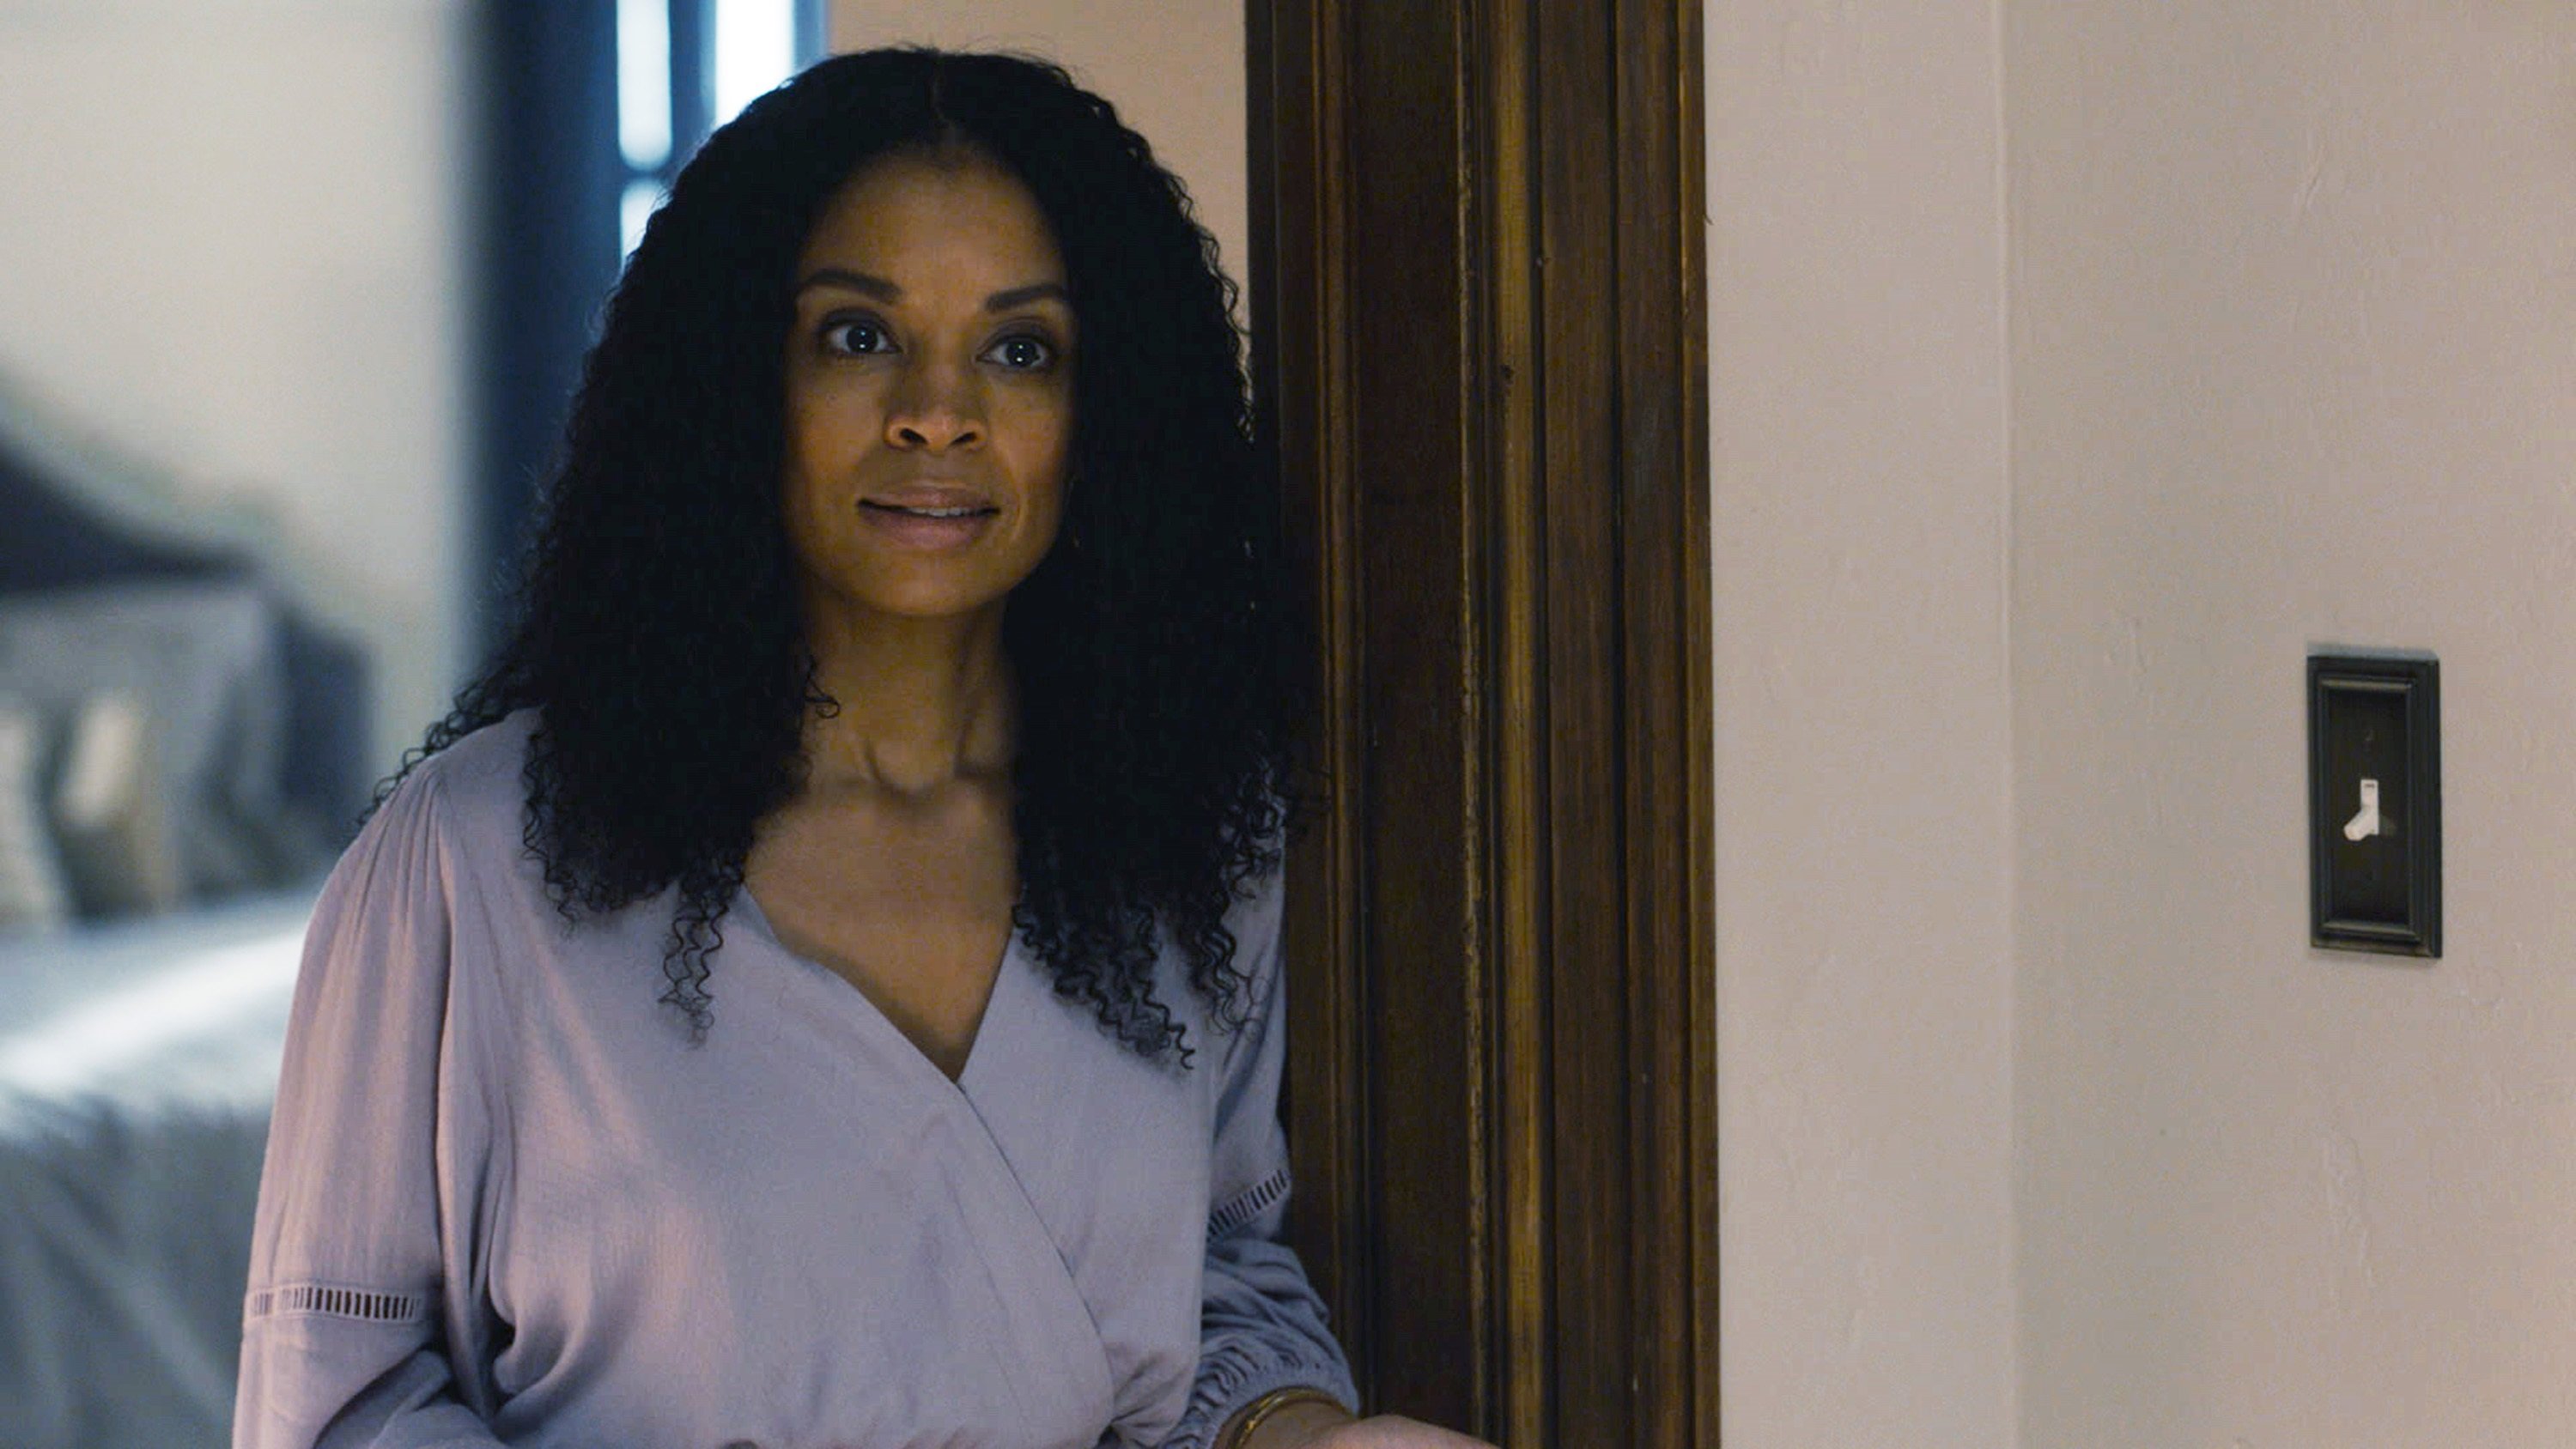 This Is Us next episode features Susan Kelechi Watson as Beth Pearson